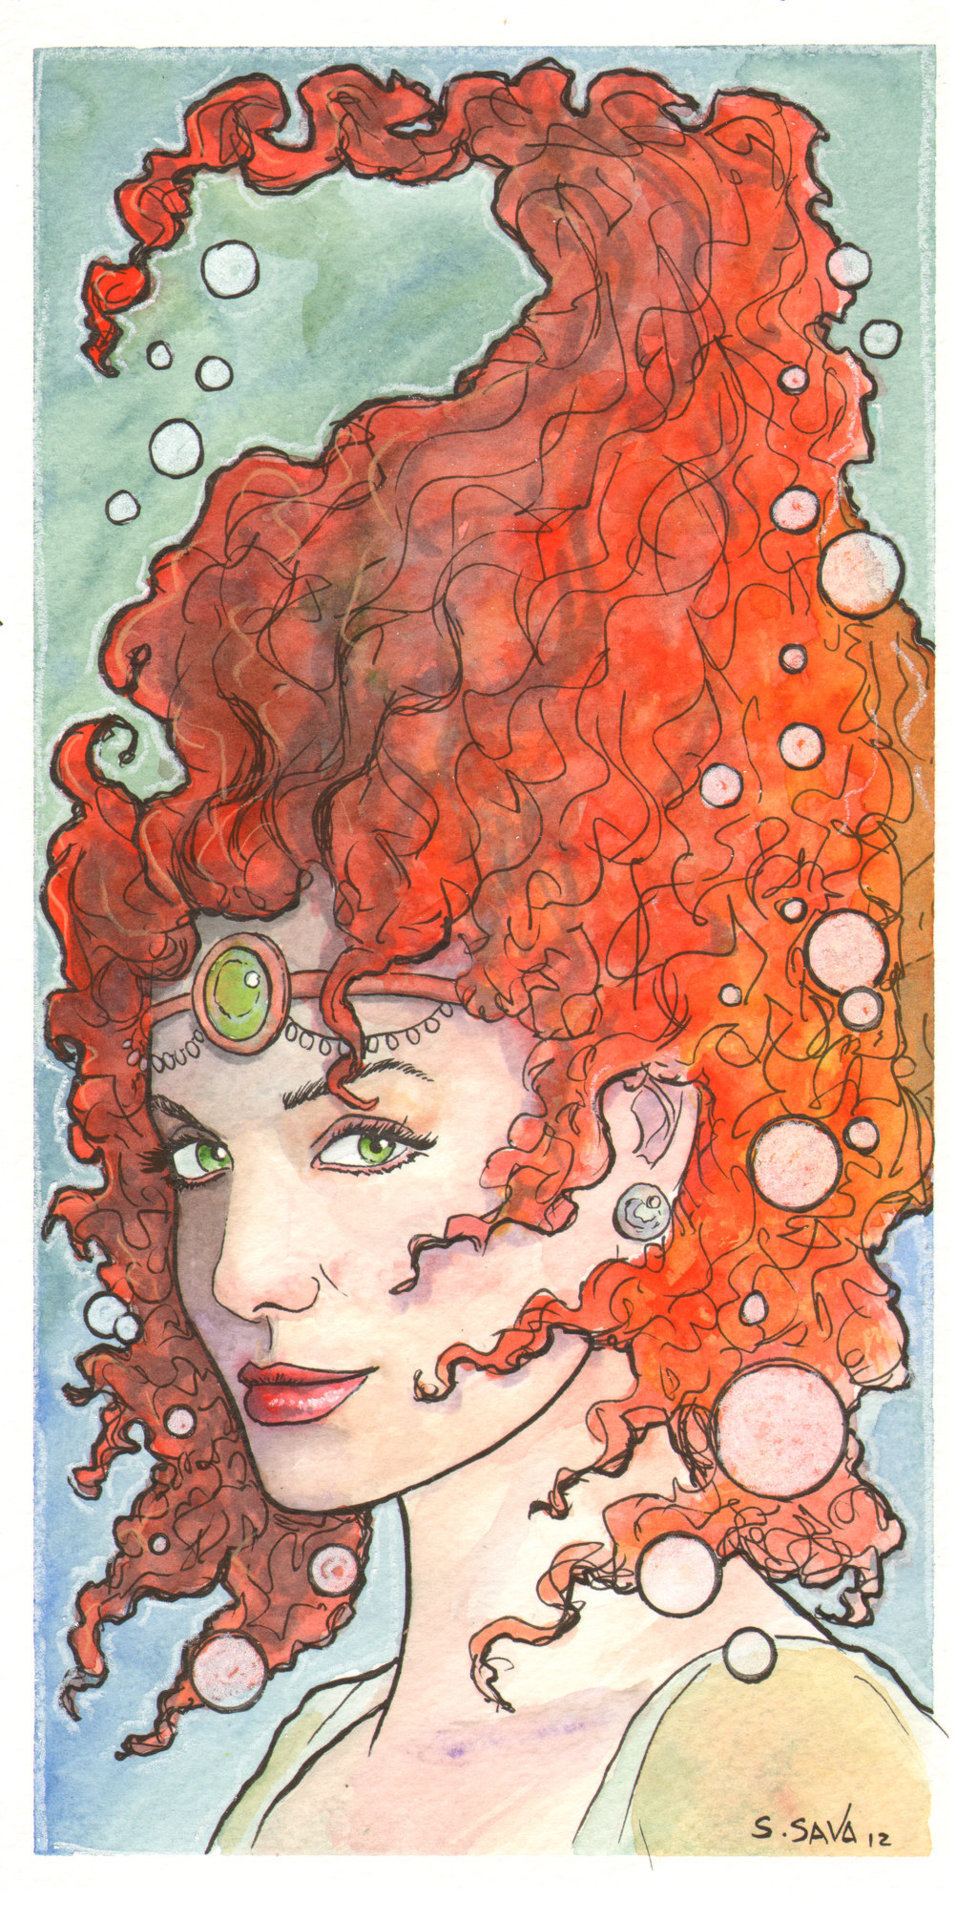 Niviene, the Lady of the Lake, from The Dreamland Chronicles.This was a request from a wonderful reader who has supported me and my comic for years. I hope she likes it.Watercolor and ink on 6x12 inch Watercolor Paper.While this painting is a gift… you can see other pieces for sale here…http://www.etsy.com/shop/ScottChristianSava